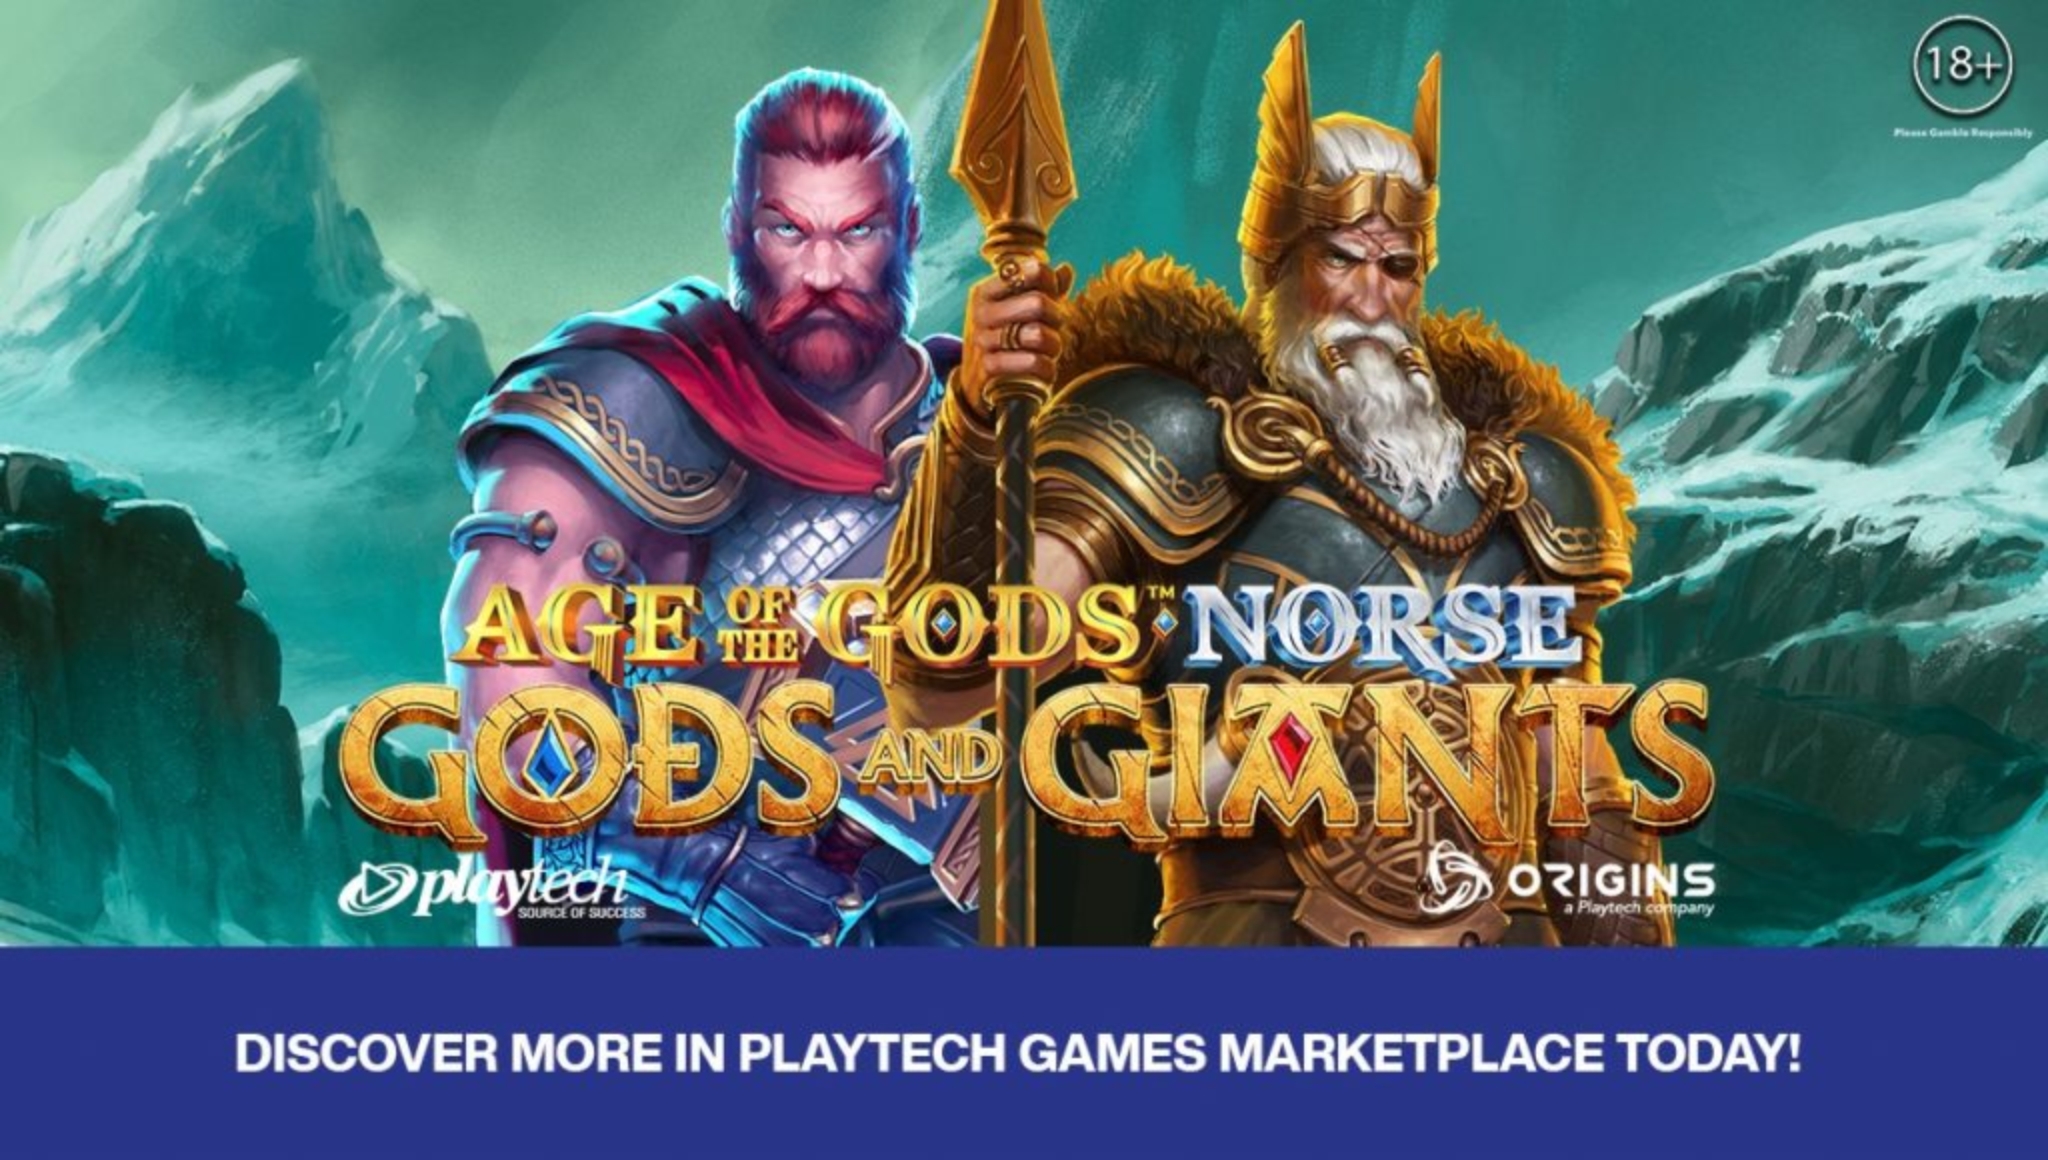 Age of the Gods Norse Gods and Giants demo